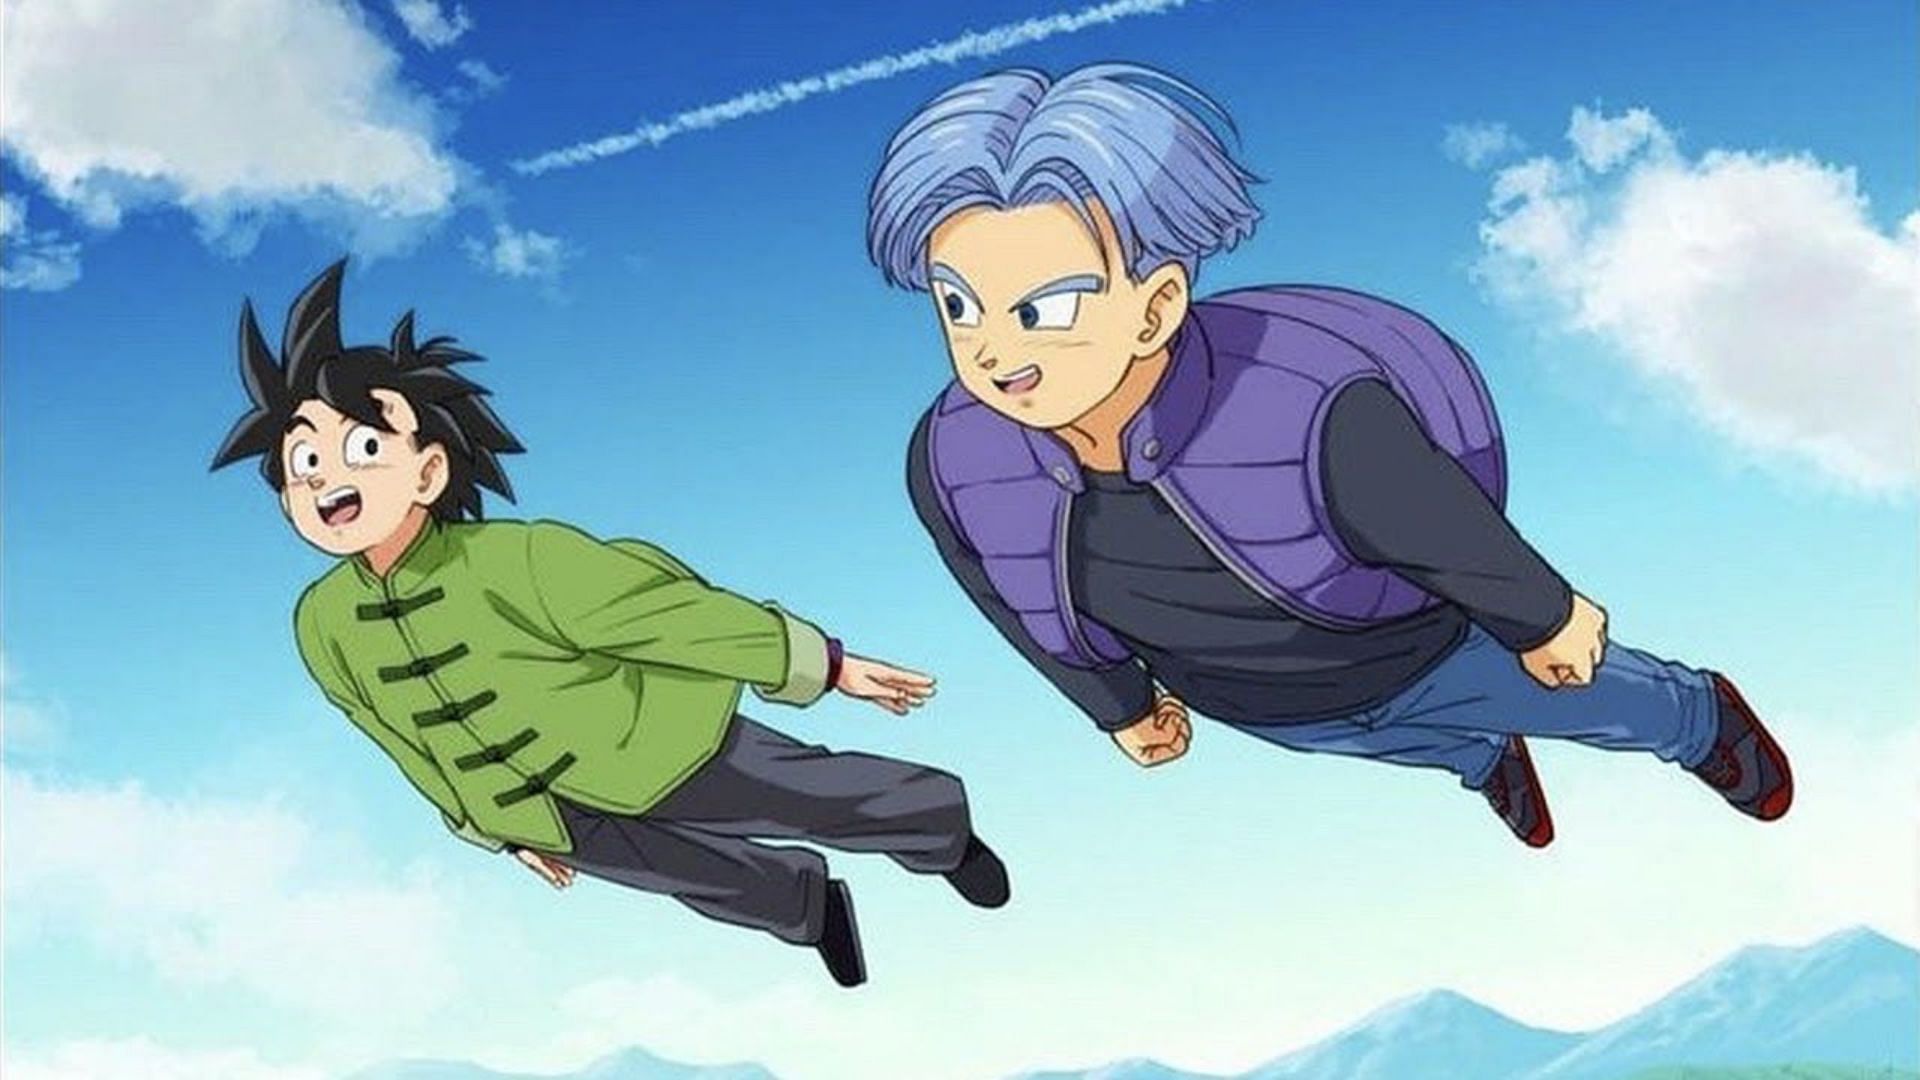 Goten and Trunks as seen in the Dragon Ball Super anime (Image via Toei Animation)